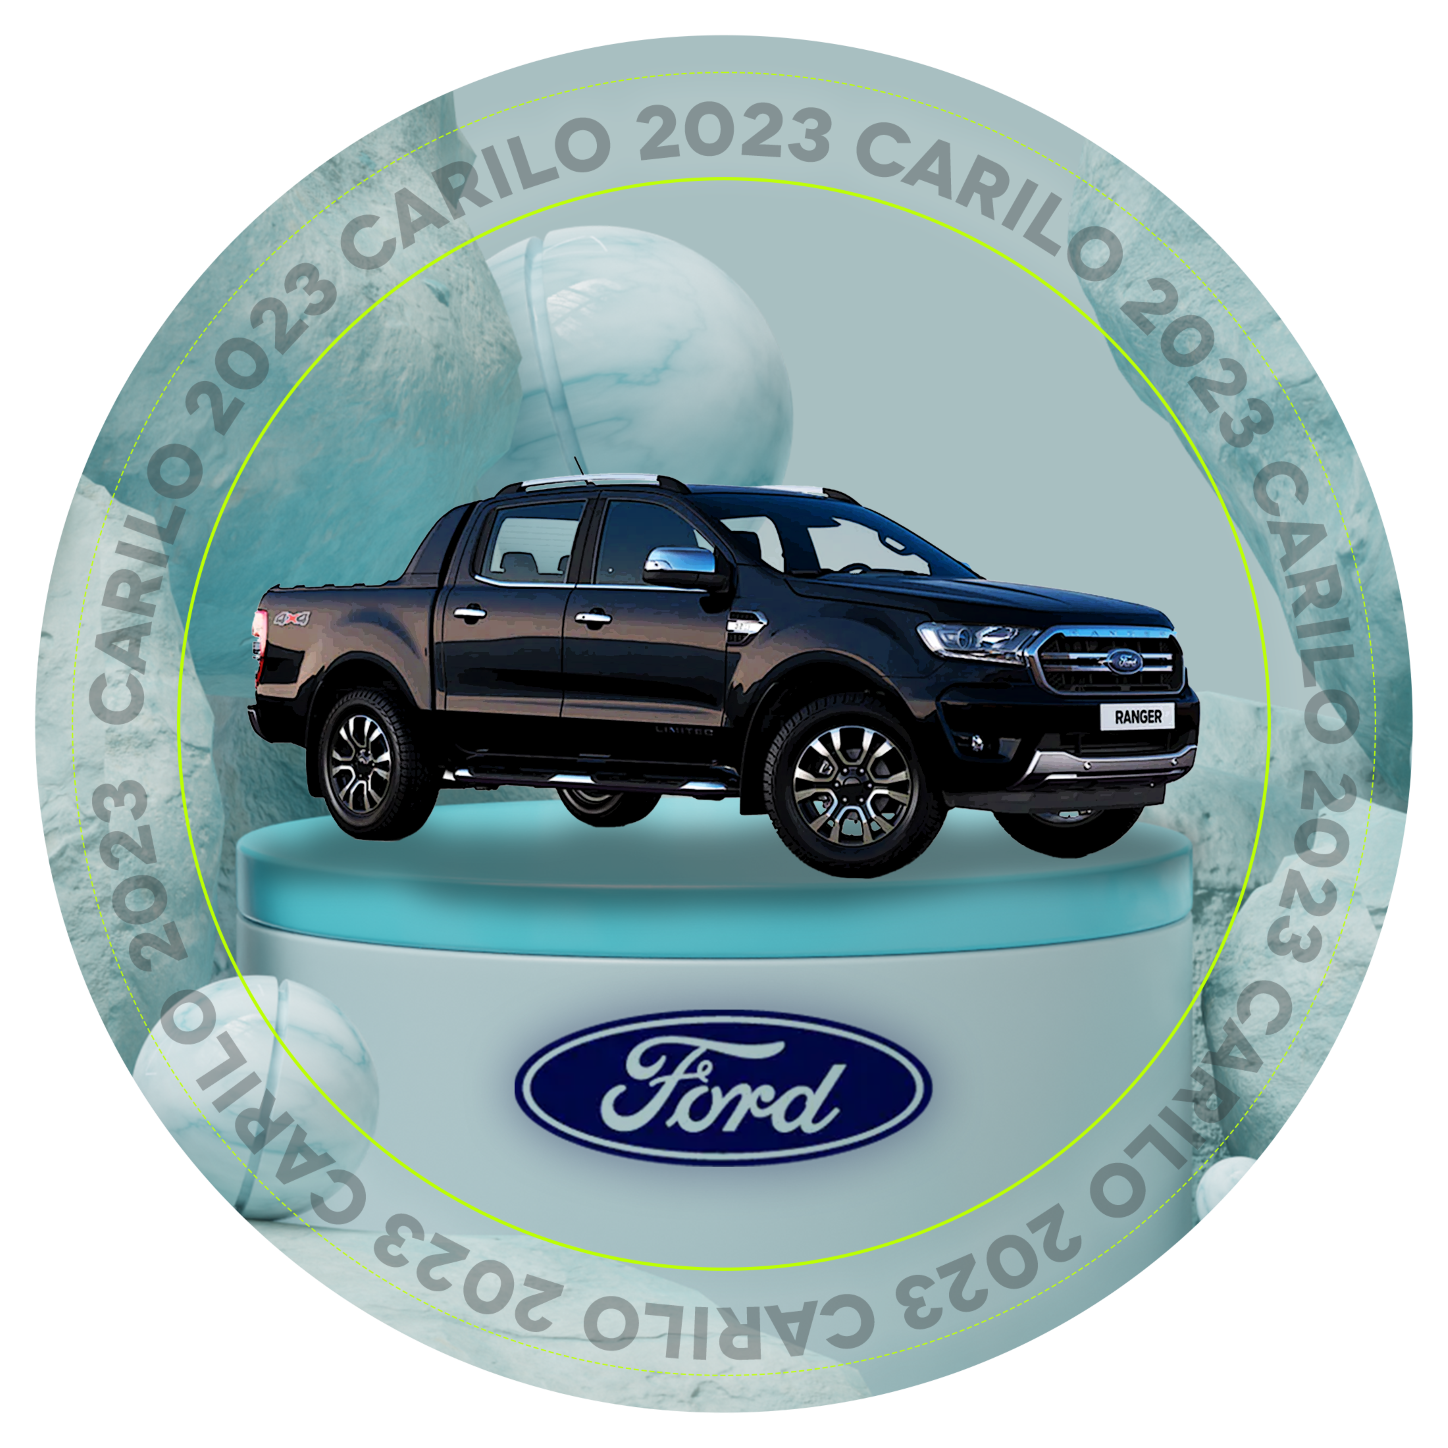 qurable-ford-ranger-carilo-2023